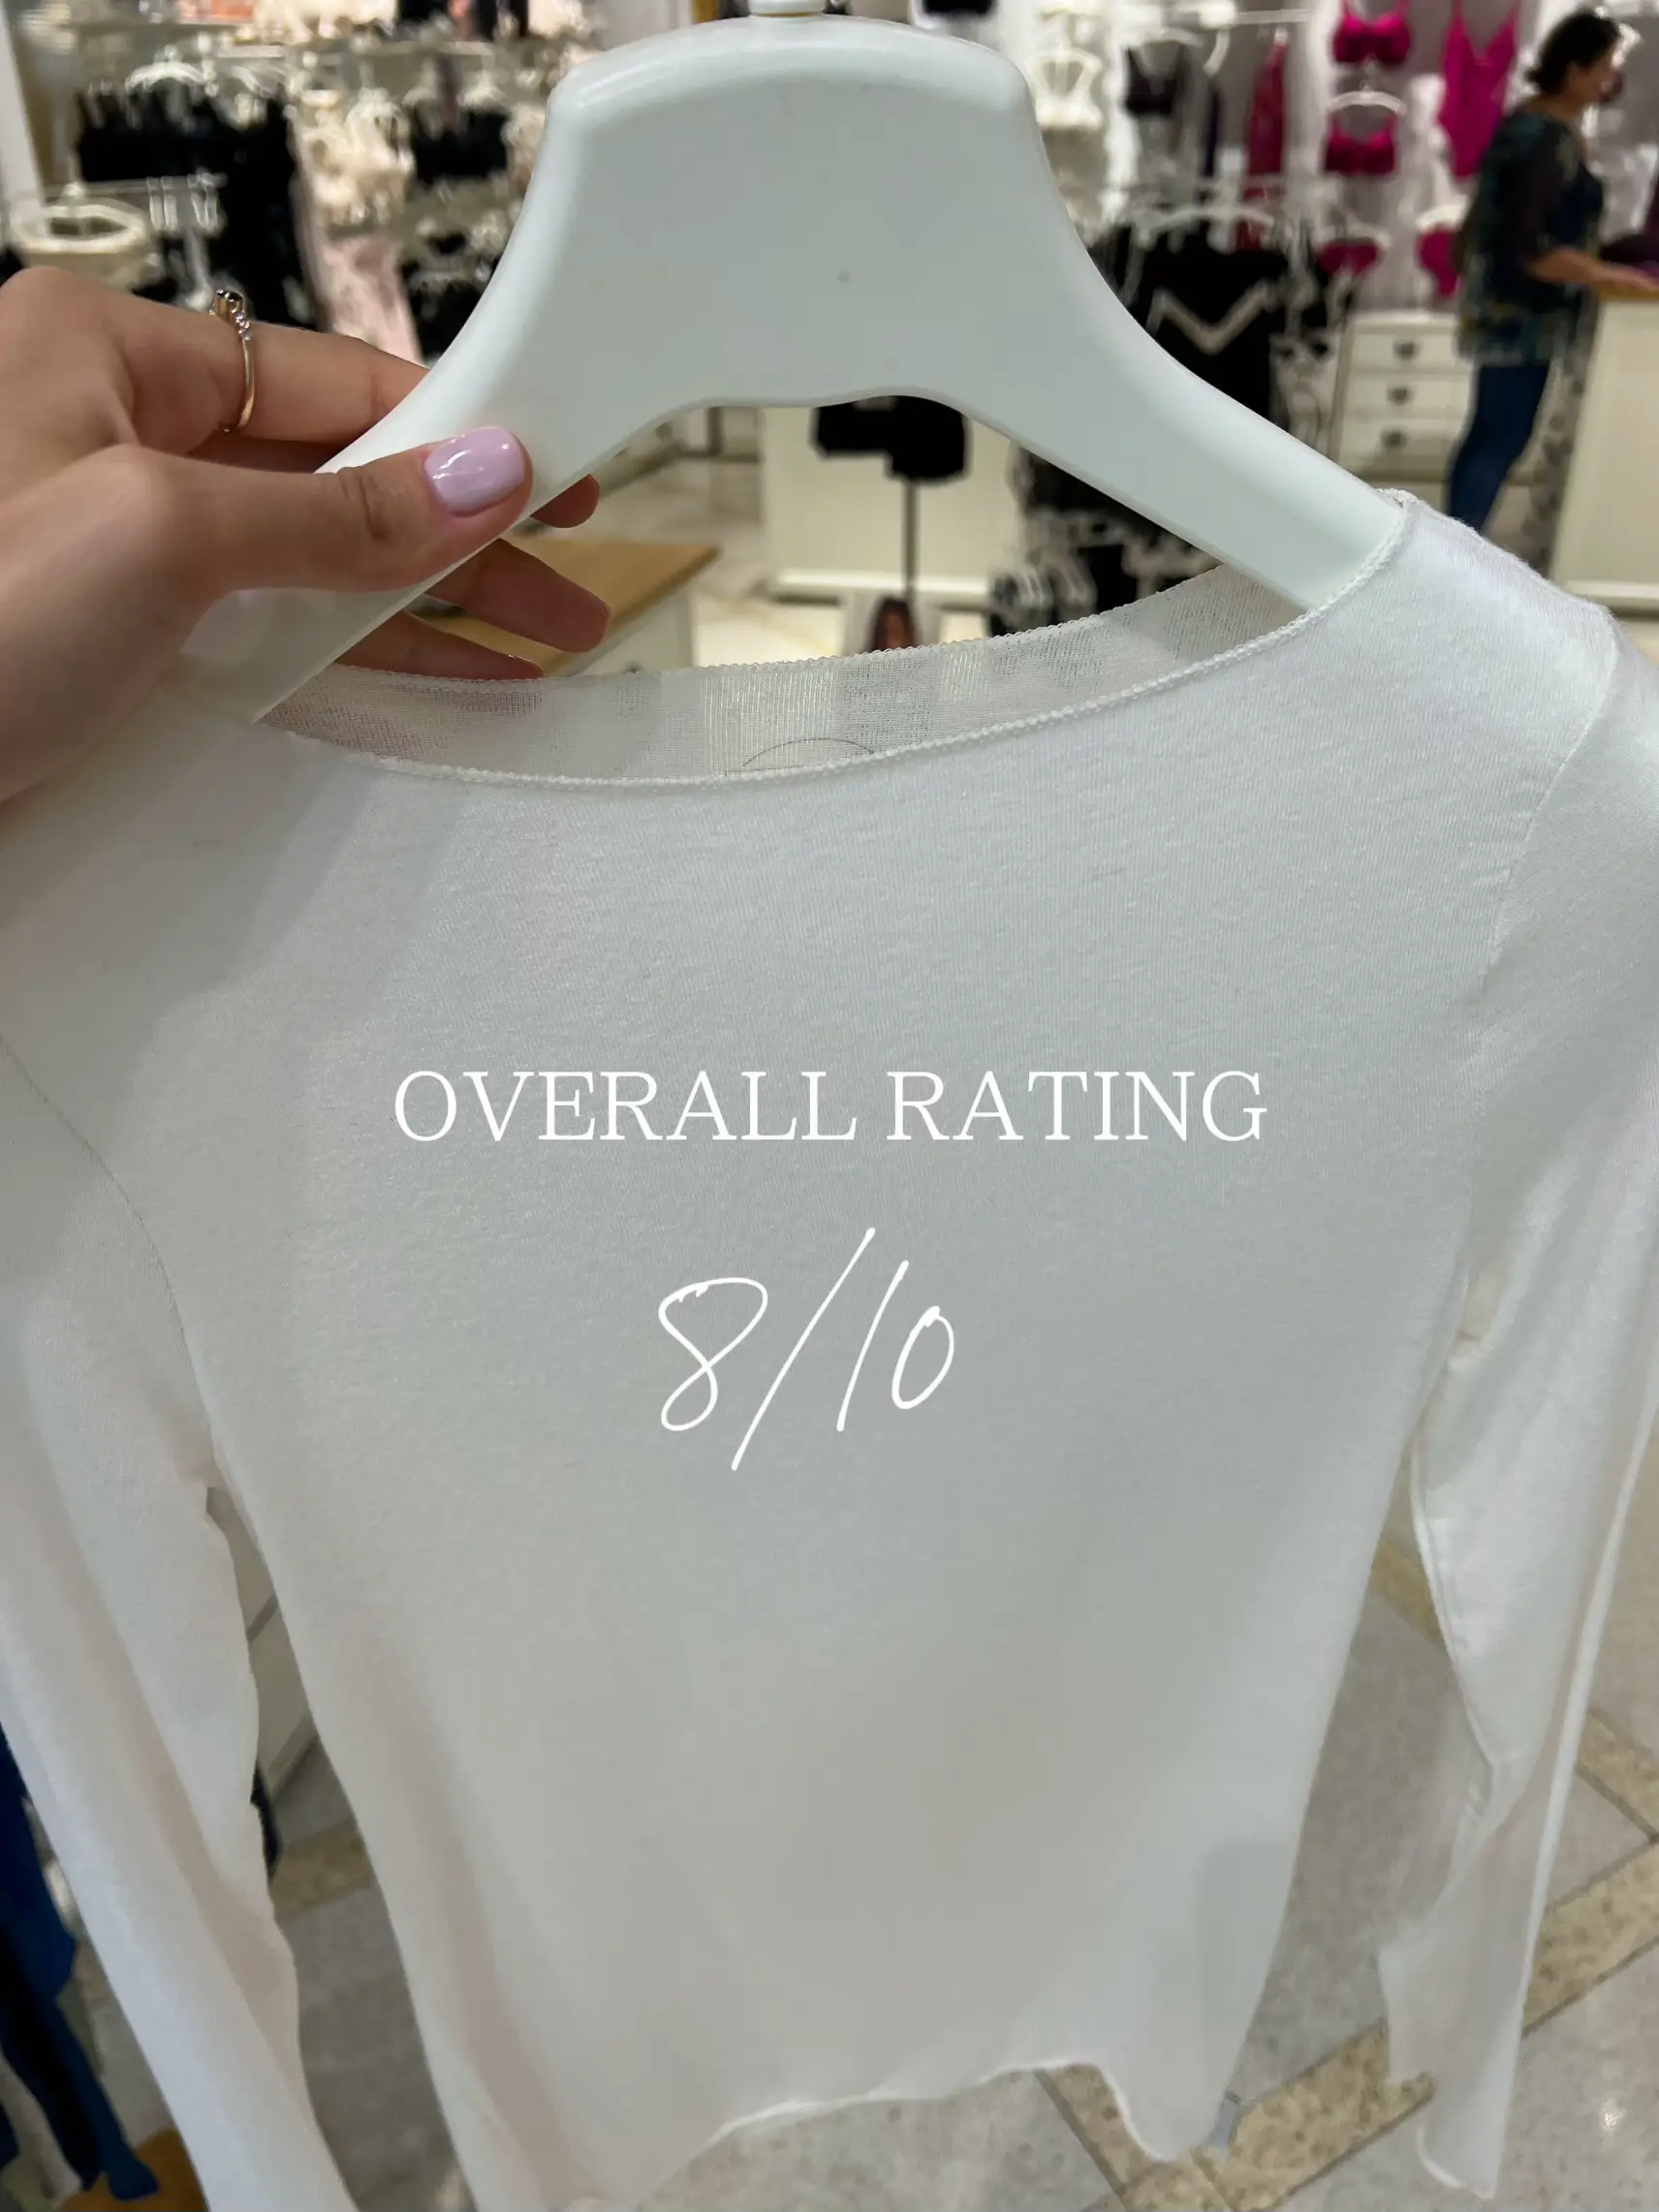 Intimissimi's boat neck top is popping off on TikTok and is said to be